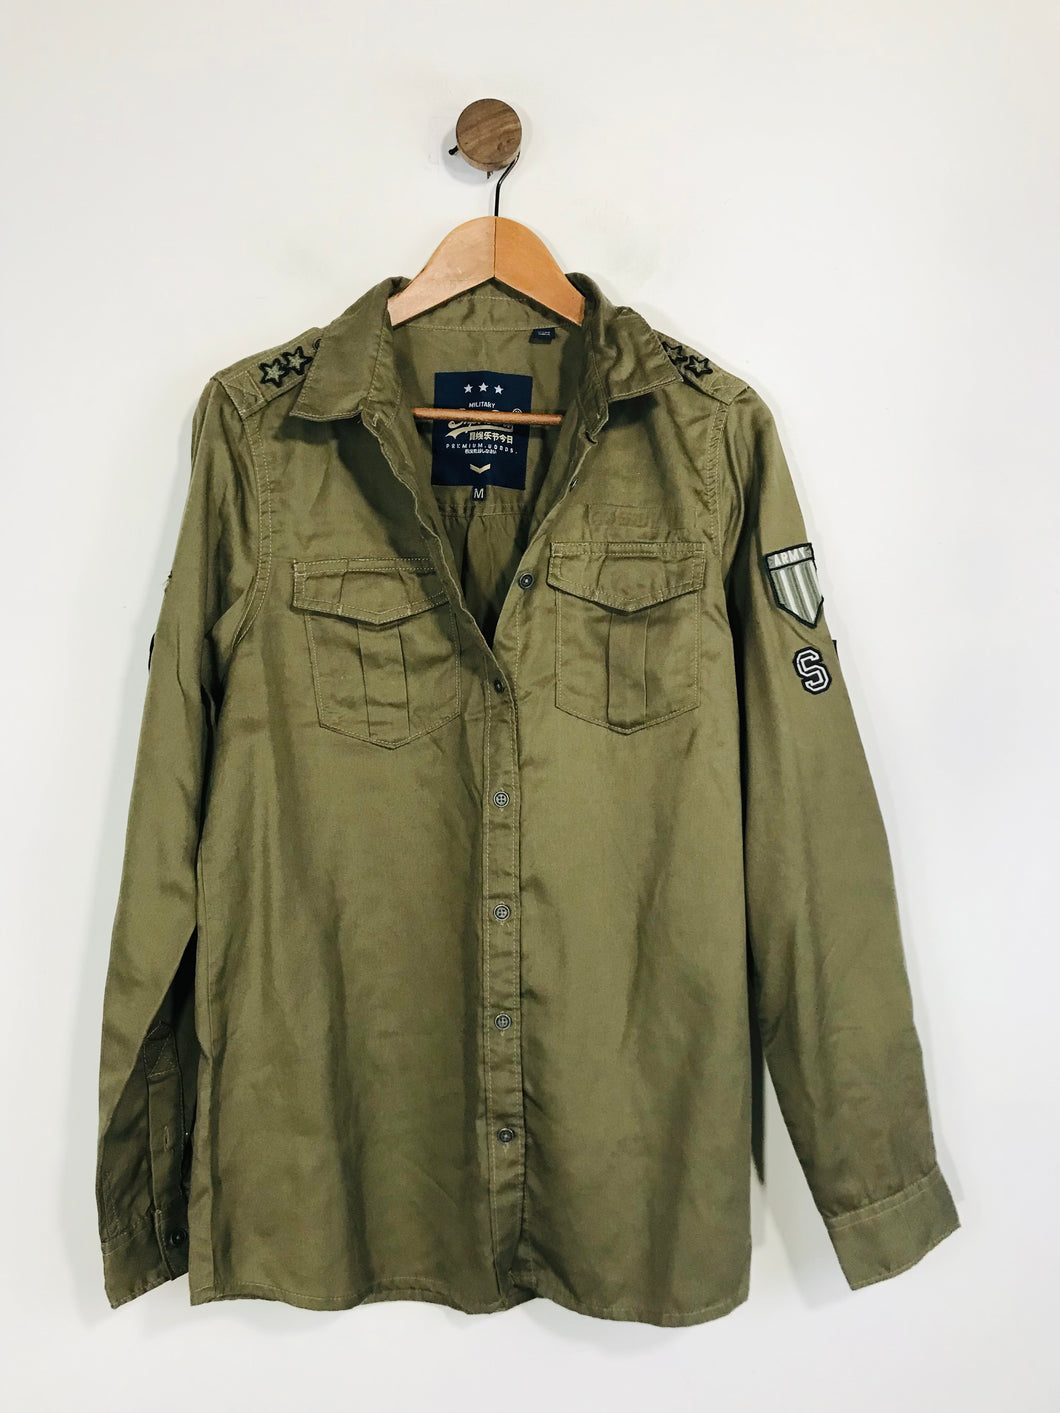 Superdry Women's Embroidered Military Button-Up Shirt | M UK10-12 | Green